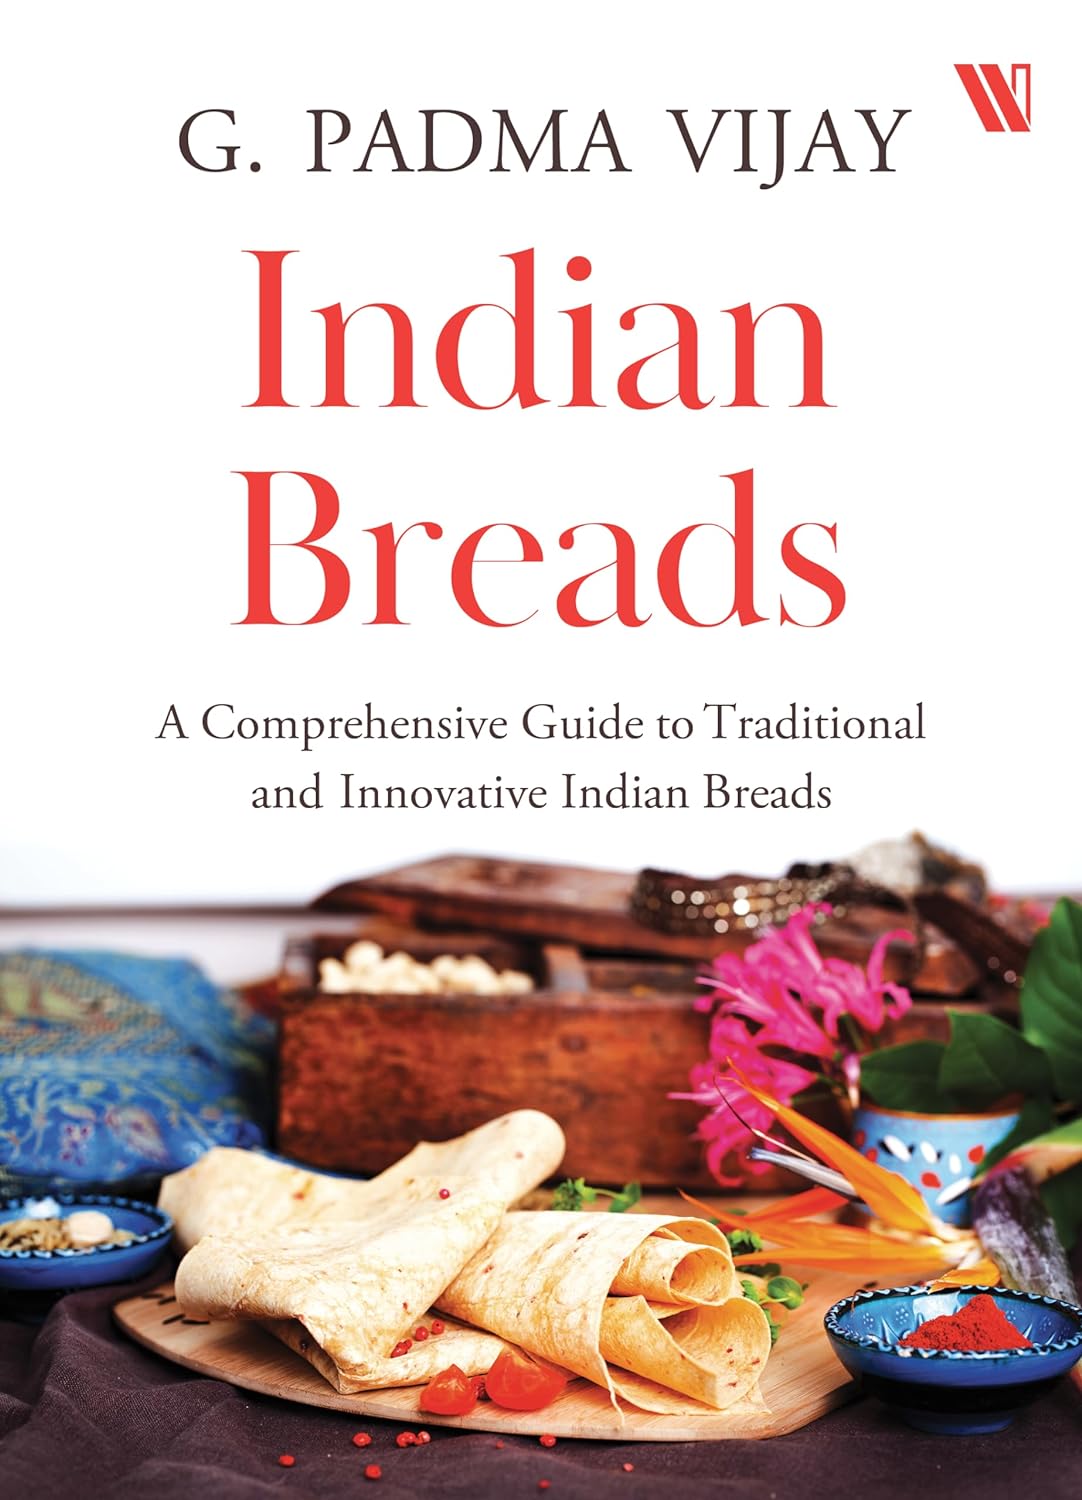 Indian Breads: A Comprehensive Guide to Traditional and Innovative Indian Breads